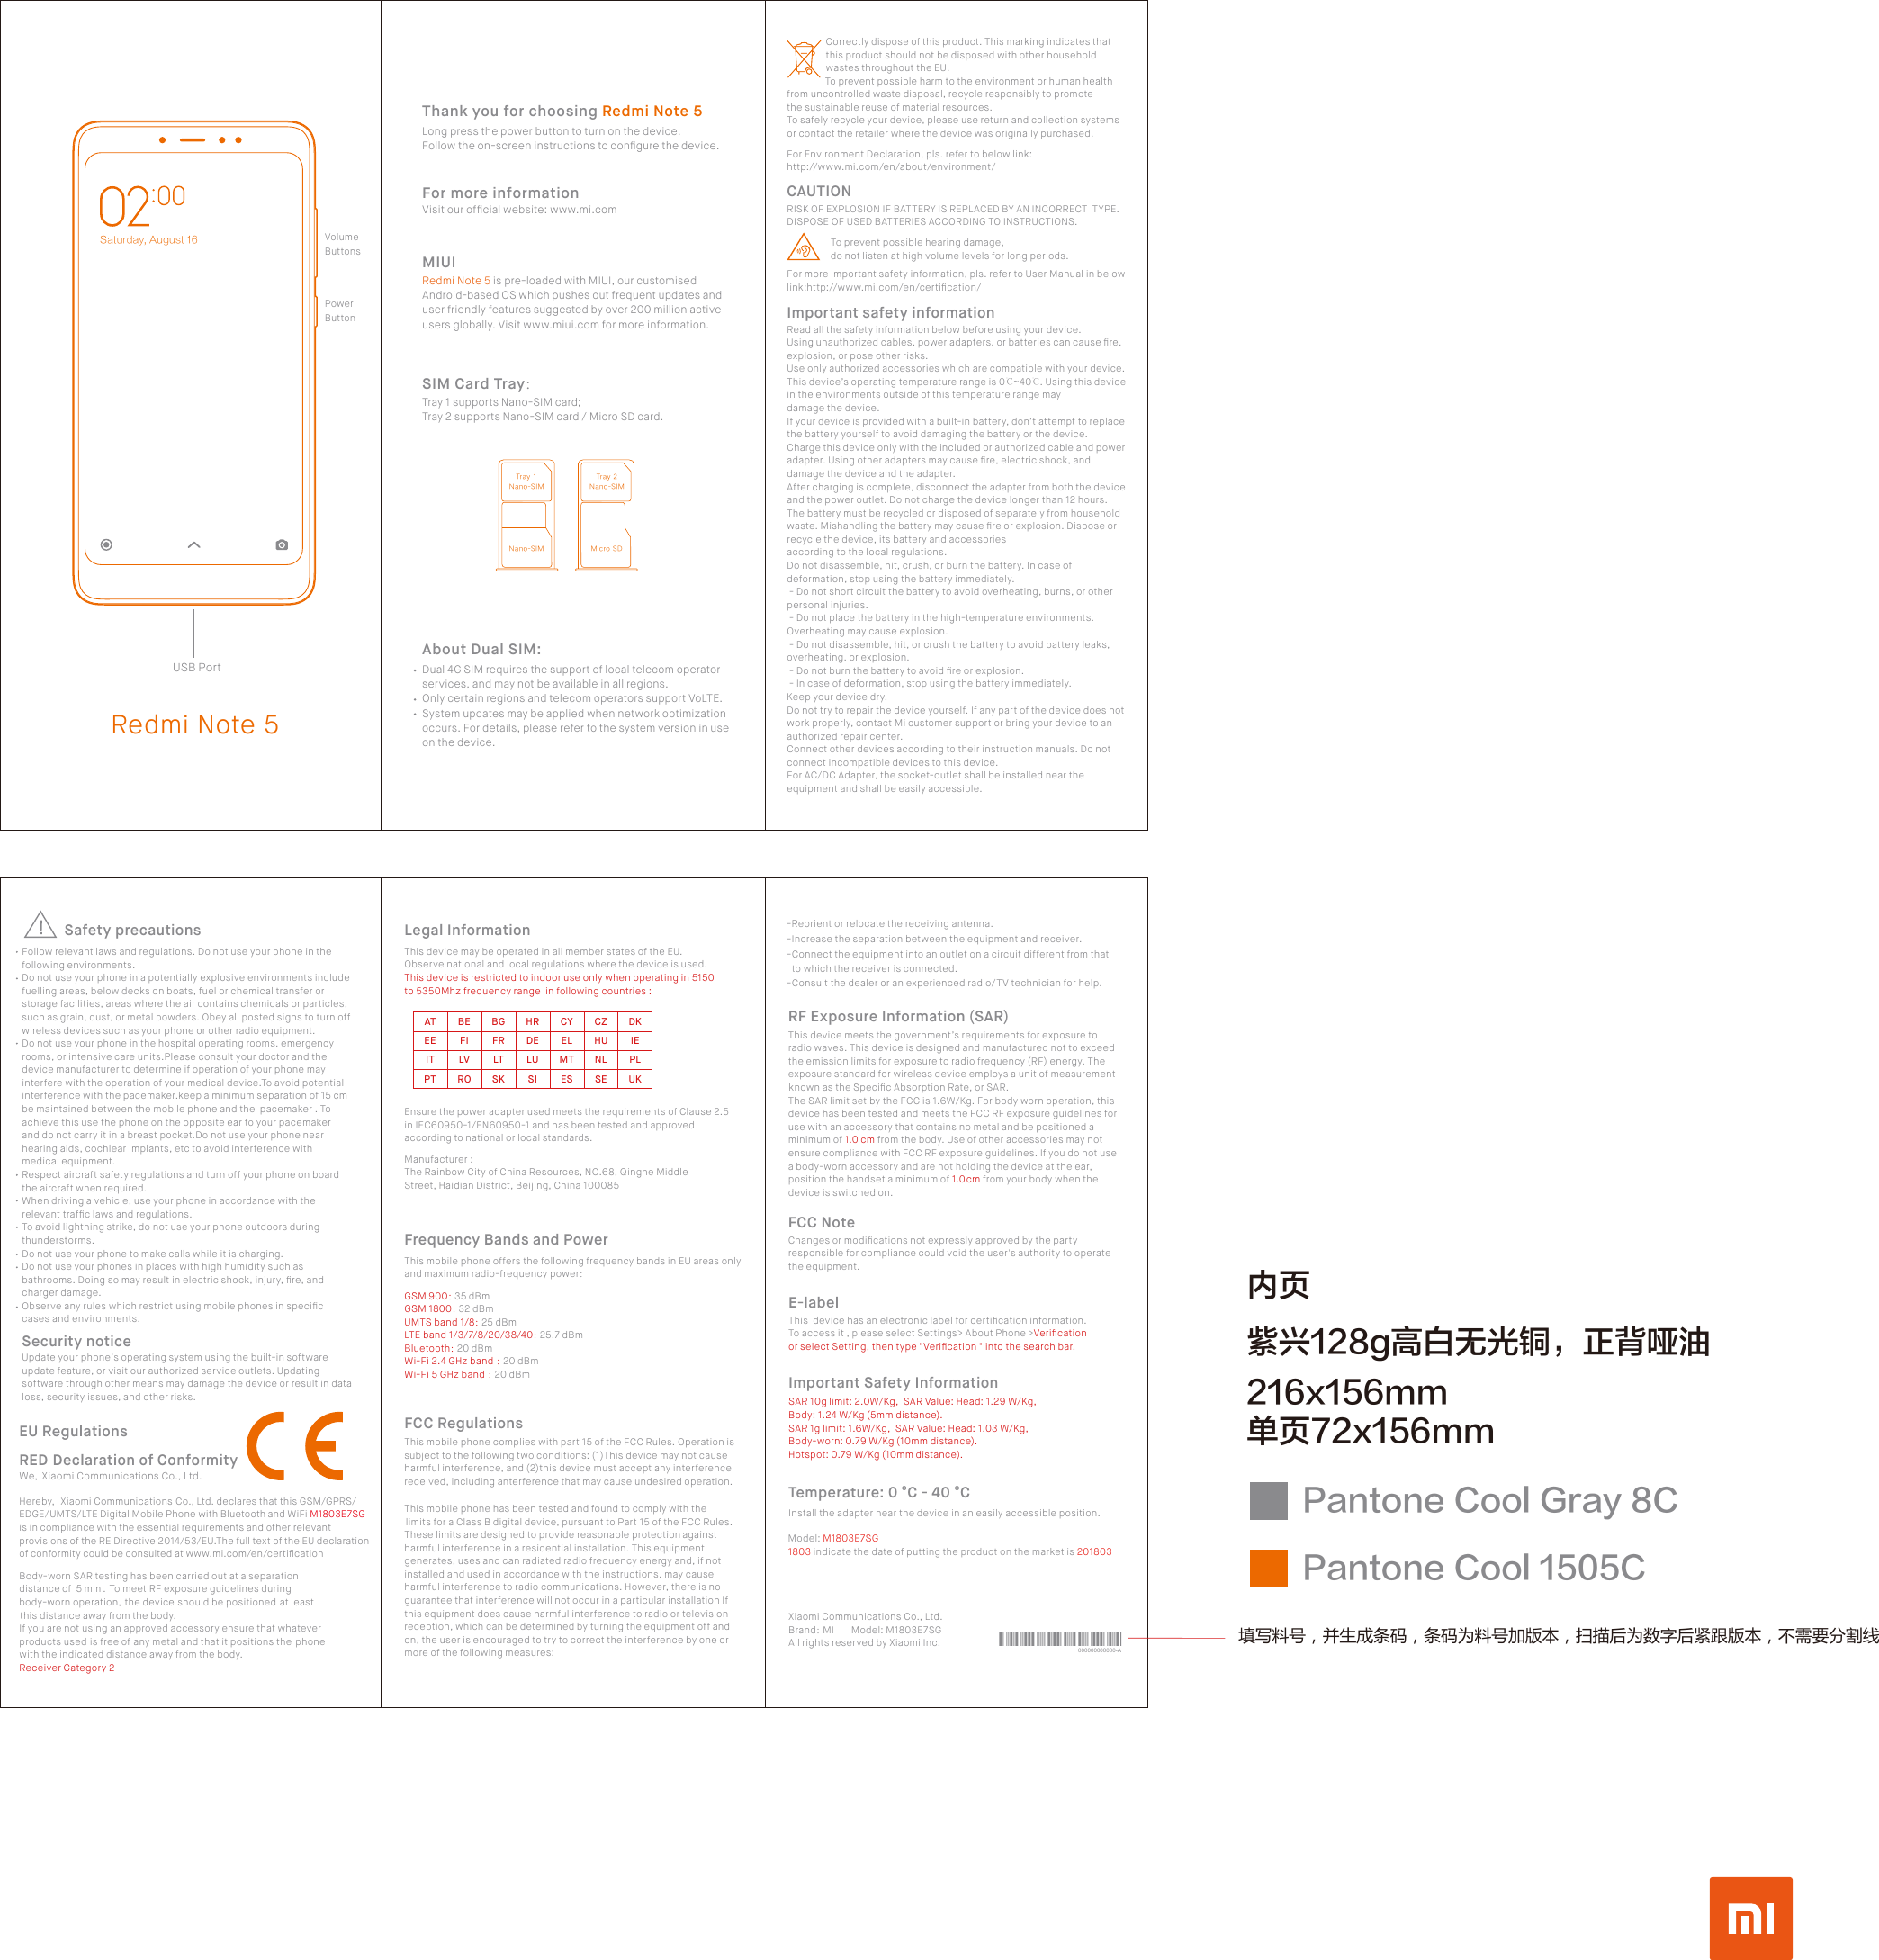 Redmi Note 5Dual 4G SIM requires the support of local telecom operator services, and may not be available in all regions.Only certain regions and telecom operators support VoLTE.System updates may be applied when network optimization occurs. For details, please refer to the system version in use on the device.About Dual SIM:SIM Card Tray：MIUIRedmi Note 5 is pre-loaded with MIUI, our customised Android-based OS which pushes out frequent updates and user friendly features suggested by over 200 million active users globally. Visit www.miui.com for more information.Thank you for choosing Redmi Note 5Long press the power button to turn on the device. Follow the on-screen instructions to conﬁgure the device.Visit our ofﬁcial website: www.mi.comFor more informationTray 1 supports Nano-SIM card;Tray 2 supports Nano-SIM card / Micro SD card.Obop.TJNUsbz!2Obop.TJNUsbz!3Obop.TJN Njdsp!TE填写料号，并生成条码，条码为料号加版本，扫描后为数字后紧跟版本，不需要分割线紫兴128g高白无光铜，正背哑油内页216x156mm单页72x156mmPantone Cool Gray 8CPantone Cool 1505CSaturday, August 16 VolumeButtonsPower ButtonUSB PortThis mobile phone offers the following frequency bands in EU areas only and maximum radio-frequency power：Frequency Bands and PowerThis mobile phone complies with part 15 of the FCC Rules. Operation is subject to the following two conditions: (1) This device may not cause harmful interference, and (2) this device must accept any interference received, including anterference that may cause undesired operation.This mobile phone has been tested and found to comply with the limits for a Class B digital device, pursuant to Part 15 of the FCC Rules. These limits are designed to provide reasonable protection against harmful interference in a residential installation. This equipment generates, uses and can radiated radio frequency energy and, if not installed and used in accordance with the instructions, may cause harmful interference to radio communications. However, there is no guarantee that interference will not occur in a particular installation If this equipment does cause harmful interference to radio or television reception, which can be determined by turning the equipment off and on, the user is encouraged to try to correct the interference by one or more of the following measures:   FCC RegulationsGSM 900：35 dBmGSM 1800：32 dBmUMTS band 1/8：25 dBmLTE band 1/3/7/8/20/38/40：25.7 dBmBluetooth：20 dBmWi-Fi 2.4 GHz band ：20 dBmWi-Fi 5 GHz band ：20 dBmATEEITPTBEFILVROBGFRLTSKHRDELUSICYELMTESCZHUNLSEDKIEPLUKManufacturer :The Rainbow City of China Resources, NO.68, Qinghe Middle Street, Haidian District, Beijing, China 100085Legal InformationThis device may be operated in all member states of the EU.Observe national and local regulations where the device is used. This device is restricted to indoor use only when operating in 5150 to 5350Mhz frequency range  in following countries :Ensure the power adapter used meets the requirements of Clause 2.5 in IEC60950-1/EN60950-1 and has been tested and approved according to national or local standards.Xiaomi Communications Co., Ltd.Brand：MI       Model: M1803E7SG All rights reserved by Xiaomi Inc. 000000000000-AThis device meets the government’s requirements for exposure to radio waves. This device is designed and manufactured not to exceed the emission limits for exposure to radio frequency (RF) energy. The exposure standard for wireless device employs a unit of measurement known as the Speciﬁc Absorption Rate, or SAR.The SAR limit set by the FCC is 1.6W/Kg. For body worn operation, this device has been tested and meets the FCC RF exposure guidelines for use with an accessory that contains no metal and be positioned a minimum of 1.0 cm from the body. Use of other accessories may not ensure compliance with FCC RF exposure guidelines. If you do not use a body-worn accessory and are not holding the device at the ear, position the handset a minimum of 1.0 cm from your body when the device is switched on.Changes or modiﬁcations not expressly approved by the party responsible for compliance could void the user&apos;s authority to operate the equipment.RF Exposure Information (SAR)FCC Note-Reorient or relocate the receiving antenna.-Increase the separation between the equipment and receiver.-Connect the equipment into an outlet on a circuit different from that  to which the receiver is connected.-Consult the dealer or an experienced radio/TV technician for help.Important Safety InformationTemperature: 0 °C - 40 °CInstall the adapter near the device in an easily accessible position.This  device has an electronic label for certiﬁcation information. To access it , please select Settings&gt; About Phone &gt;Veriﬁcation or select Setting, then type &quot;Veriﬁcation &quot; into the search bar.E-labelSAR 10g limit: 2.0W/Kg,  SAR Value: Head: 1.29 W/Kg, Body: 1.24 W/Kg (5mm distance).SAR 1g limit: 1.6W/Kg,  SAR Value: Head: 1.03 W/Kg, Body-worn: 0.79 W/Kg (10mm distance).Hotspot: 0.79 W/Kg (10mm distance).Model: M1803E7SG1803 indicate the date of putting the product on the market is 201803Follow relevant laws and regulations. Do not use your phone in the following environments.Do not use your phone in a potentially explosive environments include fuelling areas, below decks on boats, fuel or chemical transfer or storage facilities, areas where the air contains chemicals or particles, such as grain, dust, or metal powders. Obey all posted signs to turn off wireless devices such as your phone or other radio equipment.Do not use your phone in the hospital operating rooms, emergency rooms, or intensive care units.Please consult your doctor and the device manufacturer to determine if operation of your phone may interfere with the operation of your medical device.To avoid potential interference with the pacemaker.keep a minimum separation of 15 cm be maintained between the mobile phone and the  pacemaker . To achieve this use the phone on the opposite ear to your pacemaker and do not carry it in a breast pocket.Do not use your phone near hearing aids, cochlear implants, etc to avoid interference with medical equipment.Respect aircraft safety regulations and turn off your phone on board the aircraft when required.When driving a vehicle, use your phone in accordance with the relevant trafﬁc laws and regulations.To avoid lightning strike, do not use your phone outdoors during thunderstorms.Do not use your phone to make calls while it is charging.Do not use your phones in places with high humidity such as bathrooms. Doing so may result in electric shock, injury, ﬁre, and charger damage.Observe any rules which restrict using mobile phones in speciﬁc cases and environments.RED Declaration of ConformityWe,  Xiaomi Communications Co., Ltd.Body-worn SAR testing has been carried out at a separation distance of  5 mm . To meet RF exposure guidelines during body-worn operation, the device should be positioned at least this distance away from the body. If you are not using an approved accessory ensure that whatever products used is free of any metal and that it positions the phone with the indicated distance away from the body.Receiver Category 2Hereby, Xiaomi Communications Co., Ltd. declares that this GSM/GPRS/EDGE/UMTS/LTE Digital Mobile Phone with Bluetooth and WiFi M1803E7SG is in compliance with the essential requirements and other relevant provisions of the RE Directive 2014/53/EU.The full text of the EU declaration of conformity could be consulted at www.mi.com/en/certiﬁcation EU RegulationsUpdate your phone’s operating system using the built-in software update feature, or visit our authorized service outlets. Updating software through other means may damage the device or result in data loss, security issues, and other risks.Security noticeSafety precautions                Correctly dispose of this product. This marking indicates that                 this product should not be disposed with other household                 wastes throughout the EU.                 To prevent possible harm to the environment or human health from uncontrolled waste disposal, recycle responsibly to promote the sustainable reuse of material resources. To safely recycle your device, please use return and collection systems or contact the retailer where the device was originally purchased.RISK OF EXPLOSION IF BATTERY IS REPLACED BY AN INCORRECT  TYPE.DISPOSE OF USED BATTERIES ACCORDING TO INSTRUCTIONS.CAUTION                  To prevent possible hearing damage,                   do not listen at high volume levels for long periods.For Environment Declaration, pls. refer to below link:http://www.mi.com/en/about/environment/Important safety informationRead all the safety information below before using your device.Using unauthorized cables, power adapters, or batteries can cause ﬁre, explosion, or pose other risks.Use only authorized accessories which are compatible with your device.This device’s operating temperature range is 0℃~40℃. Using this device in the environments outside of this temperature range may damage the device. If your device is provided with a built-in battery, don’t attempt to replace the battery yourself to avoid damaging the battery or the device.Charge this device only with the included or authorized cable and power adapter. Using other adapters may cause ﬁre, electric shock, and damage the device and the adapter.After charging is complete, disconnect the adapter from both the device and the power outlet. Do not charge the device longer than 12 hours.The battery must be recycled or disposed of separately from household waste. Mishandling the battery may cause ﬁre or explosion. Dispose or recycle the device, its battery and accessories according to the local regulations.Do not disassemble, hit, crush, or burn the battery. In case of deformation, stop using the battery immediately. - Do not short circuit the battery to avoid overheating, burns, or other personal injuries. - Do not place the battery in the high-temperature environments. Overheating may cause explosion. - Do not disassemble, hit, or crush the battery to avoid battery leaks, overheating, or explosion. - Do not burn the battery to avoid ﬁre or explosion. - In case of deformation, stop using the battery immediately.Keep your device dry.Do not try to repair the device yourself. If any part of the device does not work properly, contact Mi customer support or bring your device to an authorized repair center.Connect other devices according to their instruction manuals. Do not connect incompatible devices to this device.For AC/DC Adapter, the socket-outlet shall be installed near the equipment and shall be easily accessible.For more important safety information, pls. refer to User Manual in below link:http://www.mi.com/en/certiﬁcation/